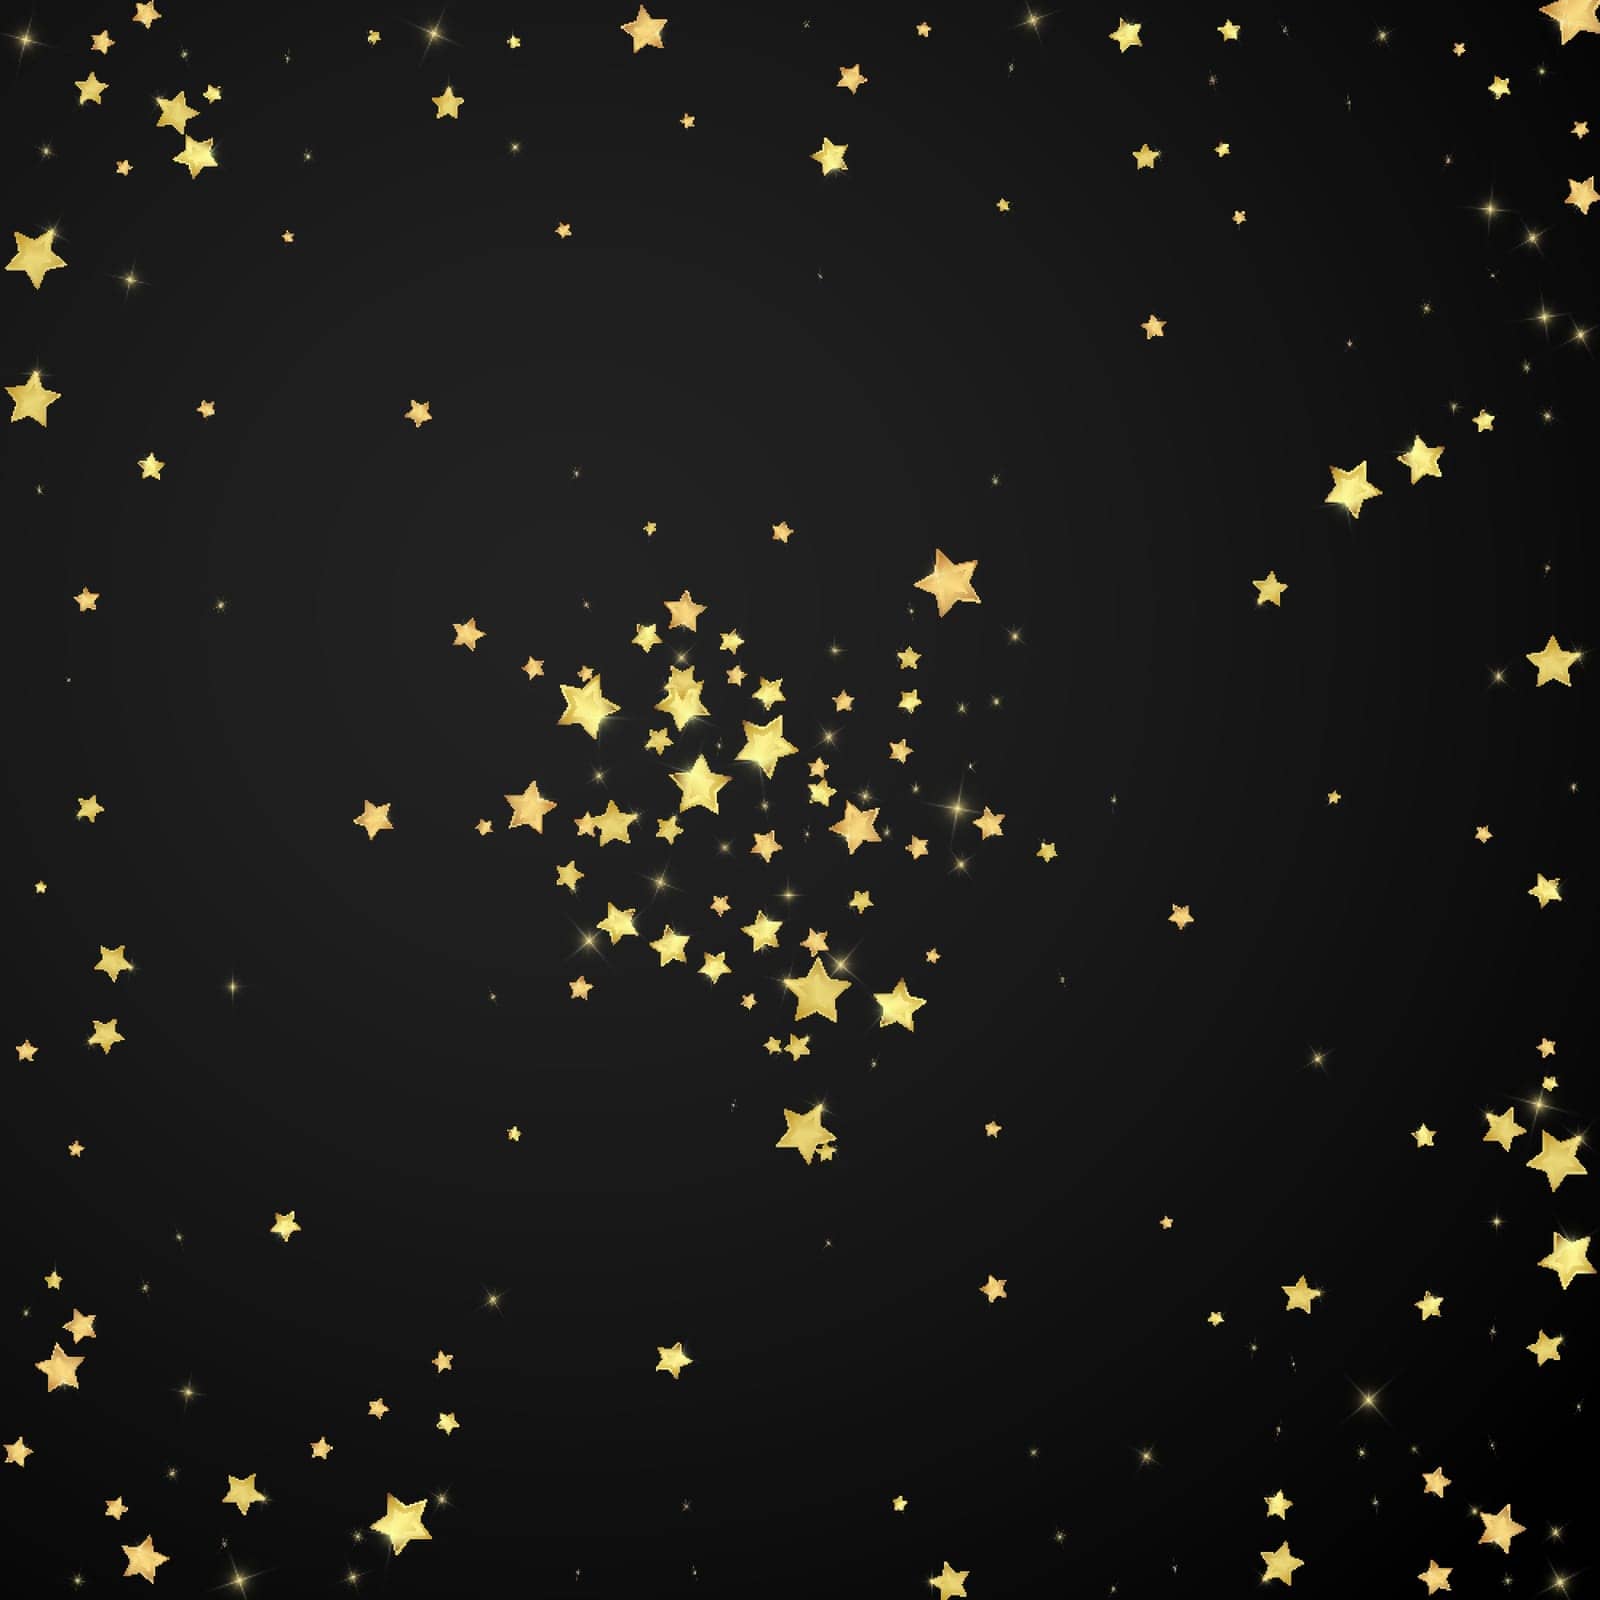 Magic stars vector overlay. Gold stars scattered around randomly, falling down, floating. Chaotic dreamy childish overlay template. Magical cartoon night sky on black background.